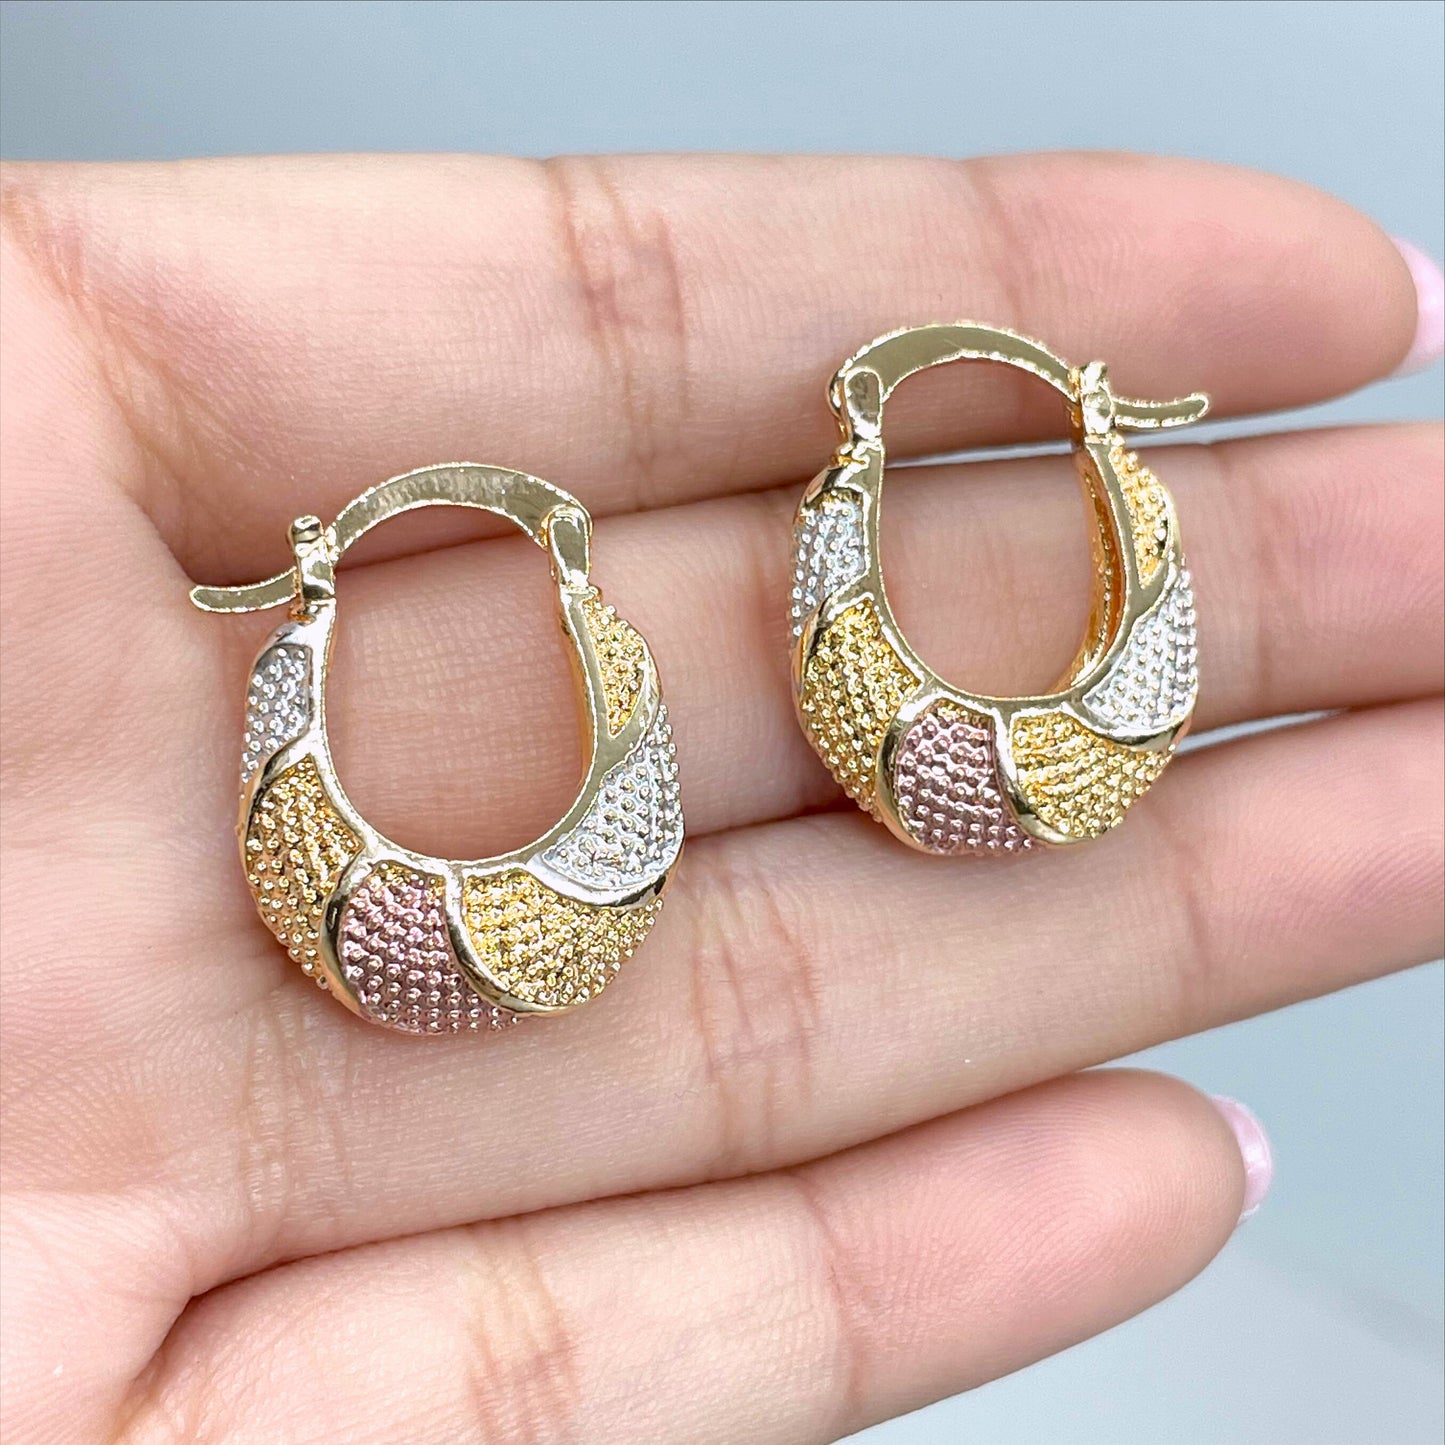 18k Gold Filled Tree Tone, Tree Color Texturized 18mm Basket Hoop Earrings, 7mm Thickness Wholesale Jewelry Making Supplies